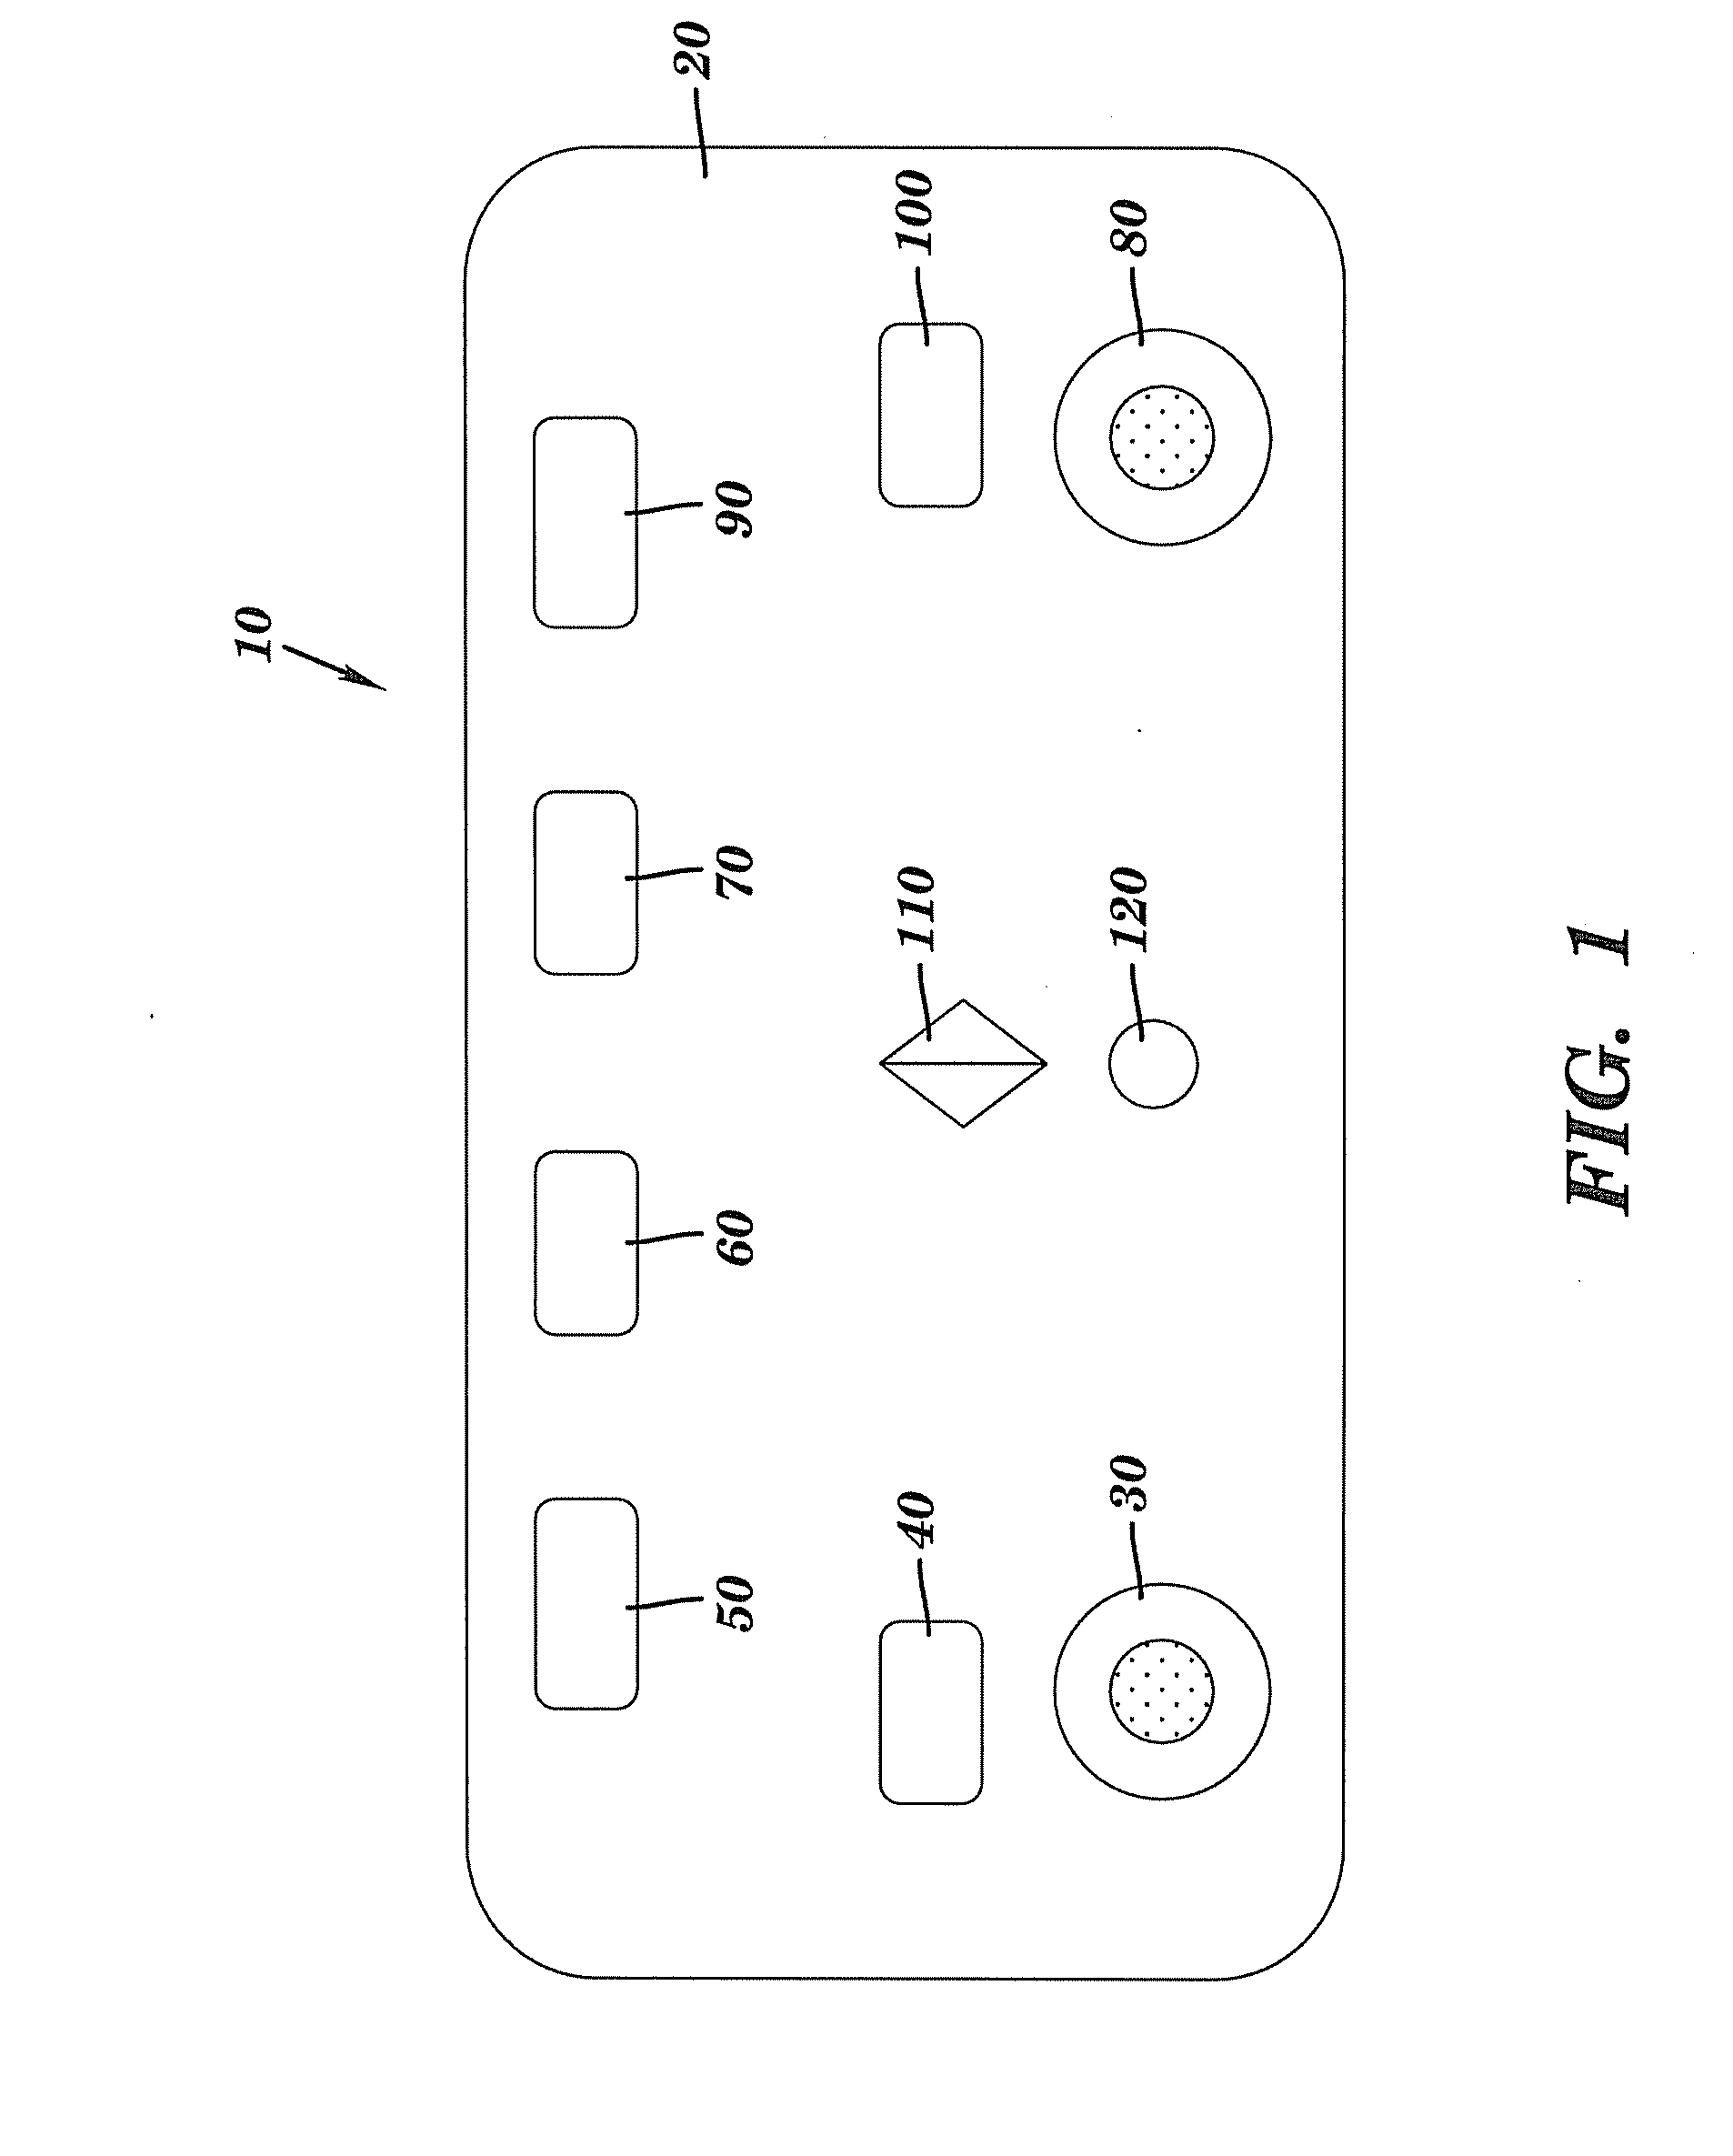 Apparatus and method for integrated phrase-based and free-form speech-to-speech translation